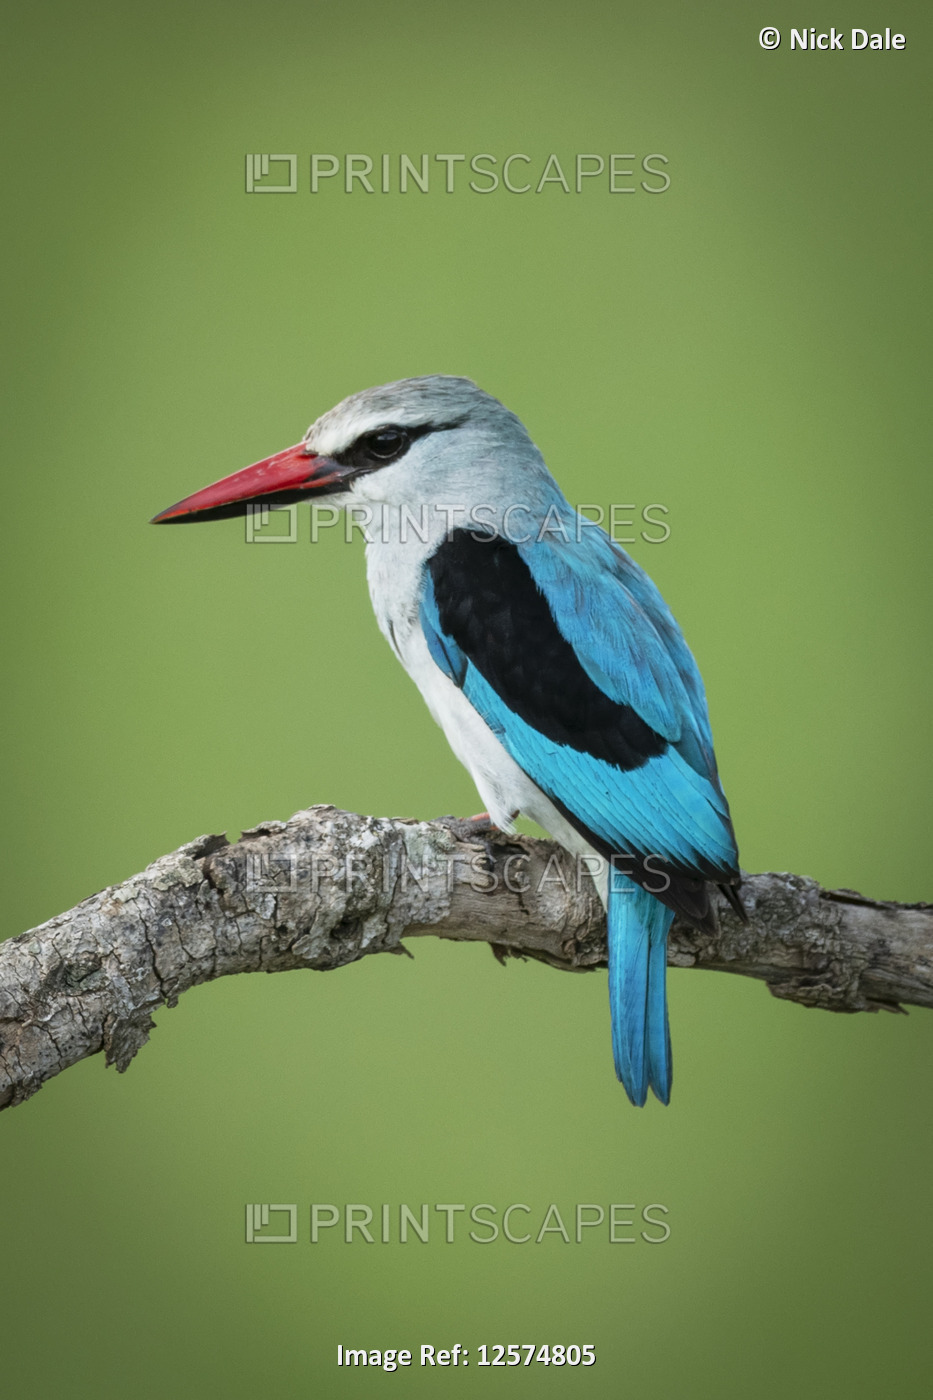 Woodland kingfisher (Halcyon senegalensis) on branch with blurred background, ...